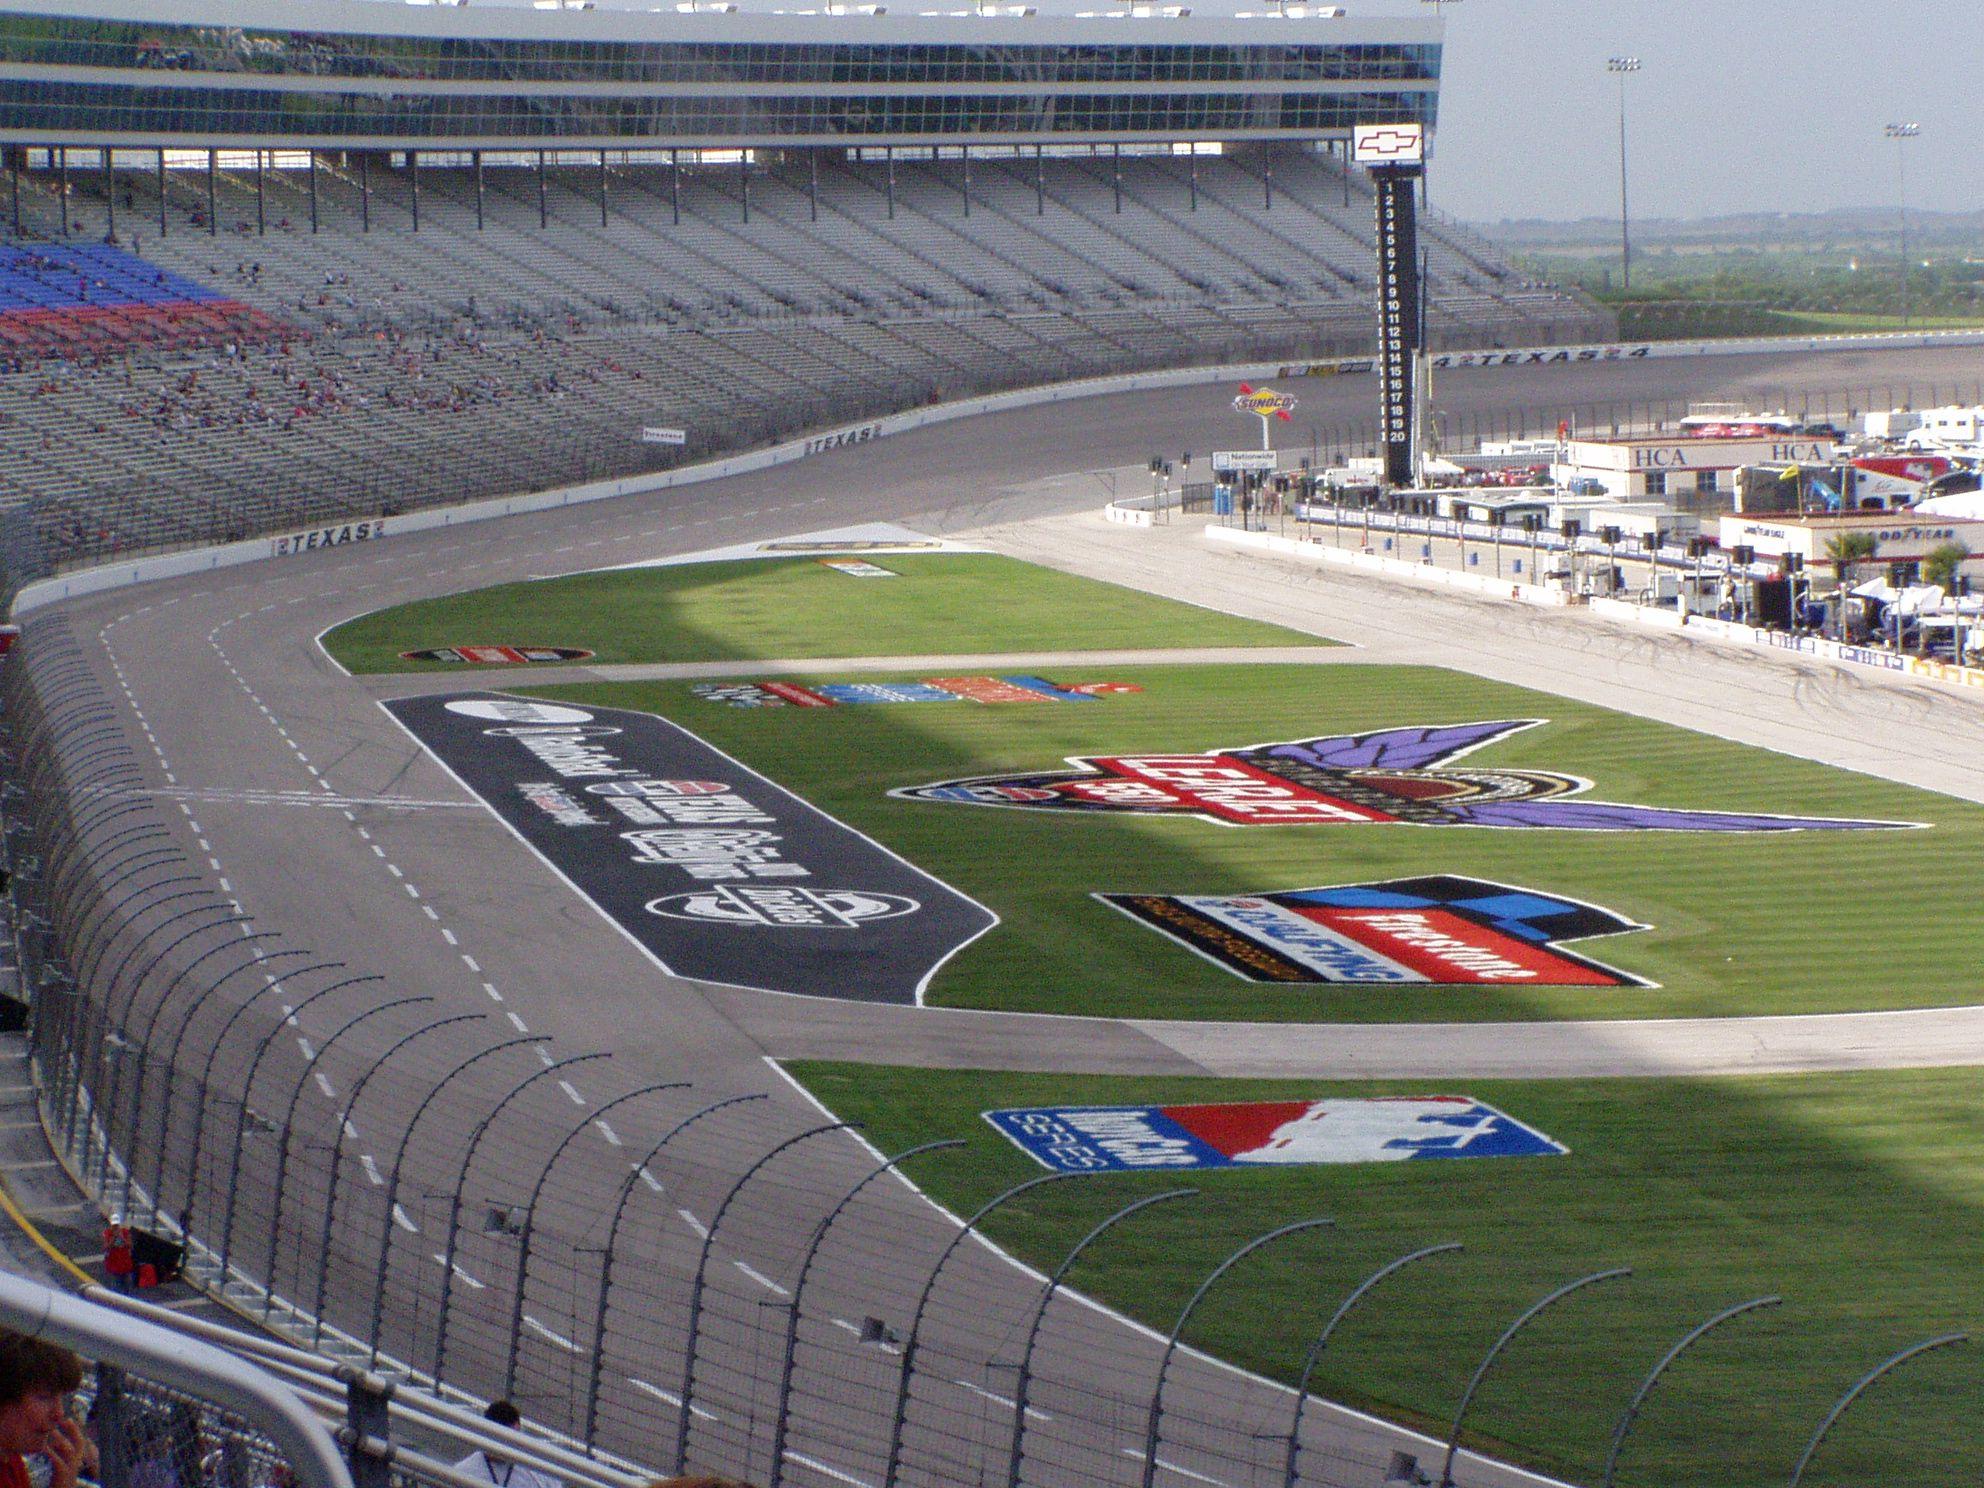 Texas Motor Speedway, Ft. Worth TX. Texas and NASCAR